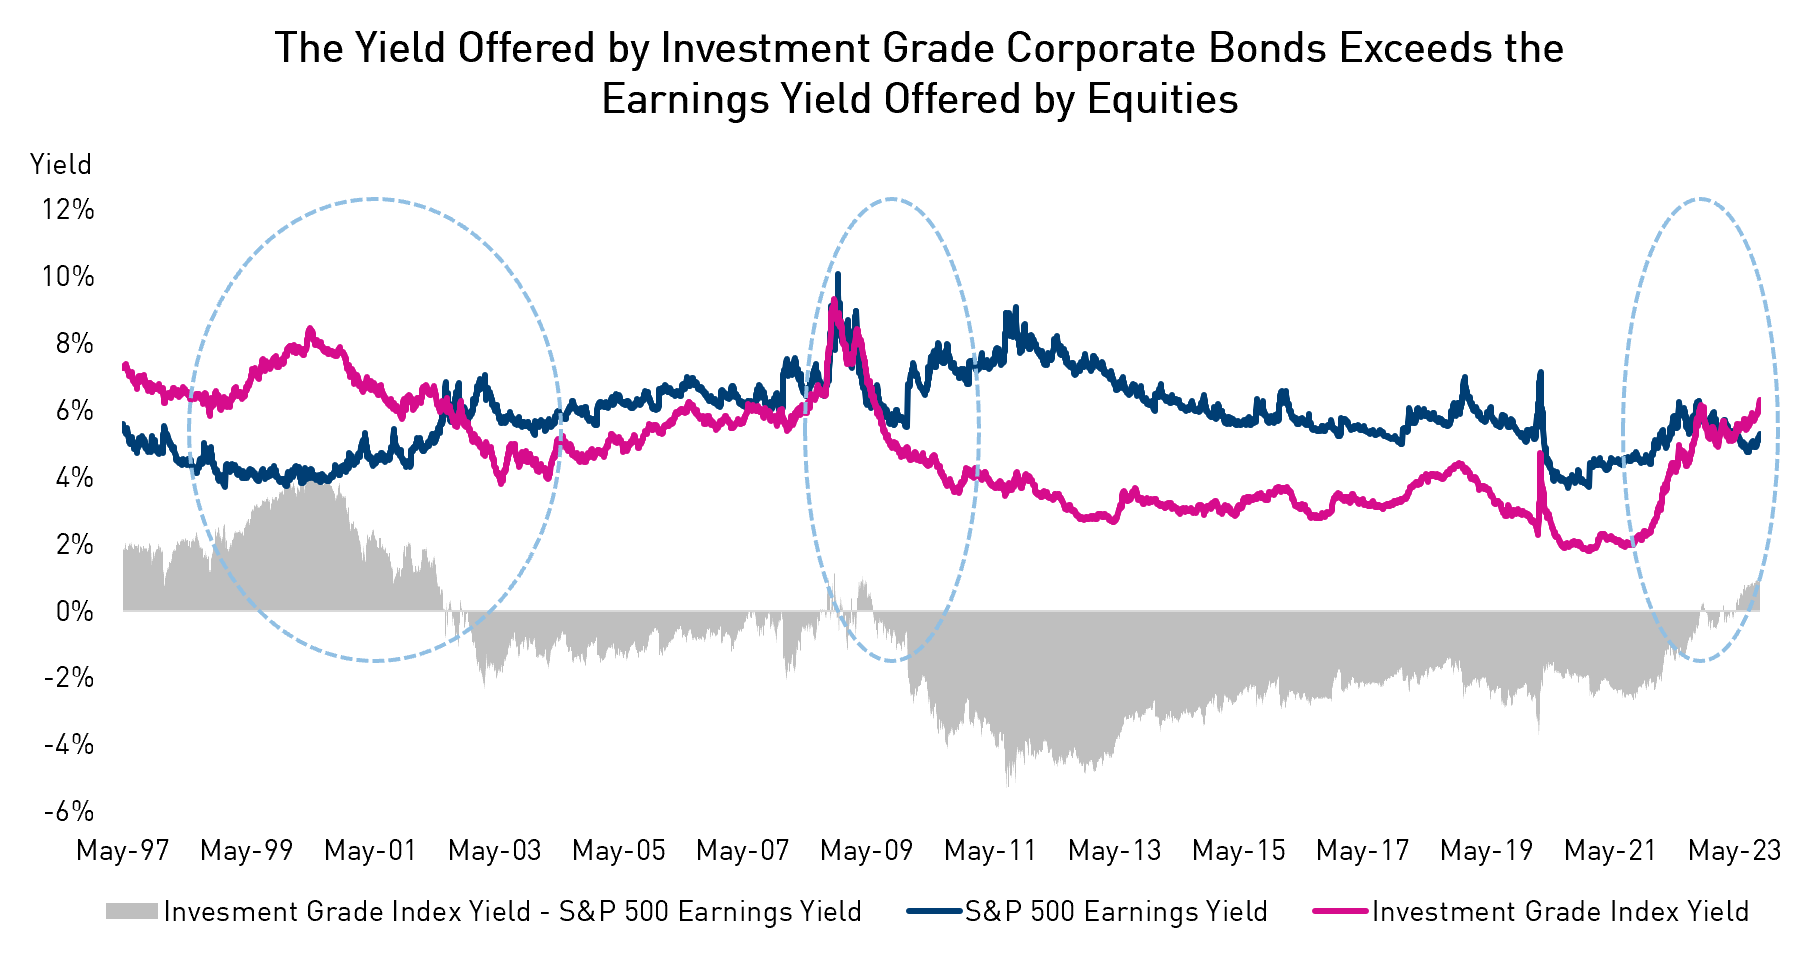 Chart showing the yield offered by investment grade corporate bonds exceeds the earnings yield offered by equities 